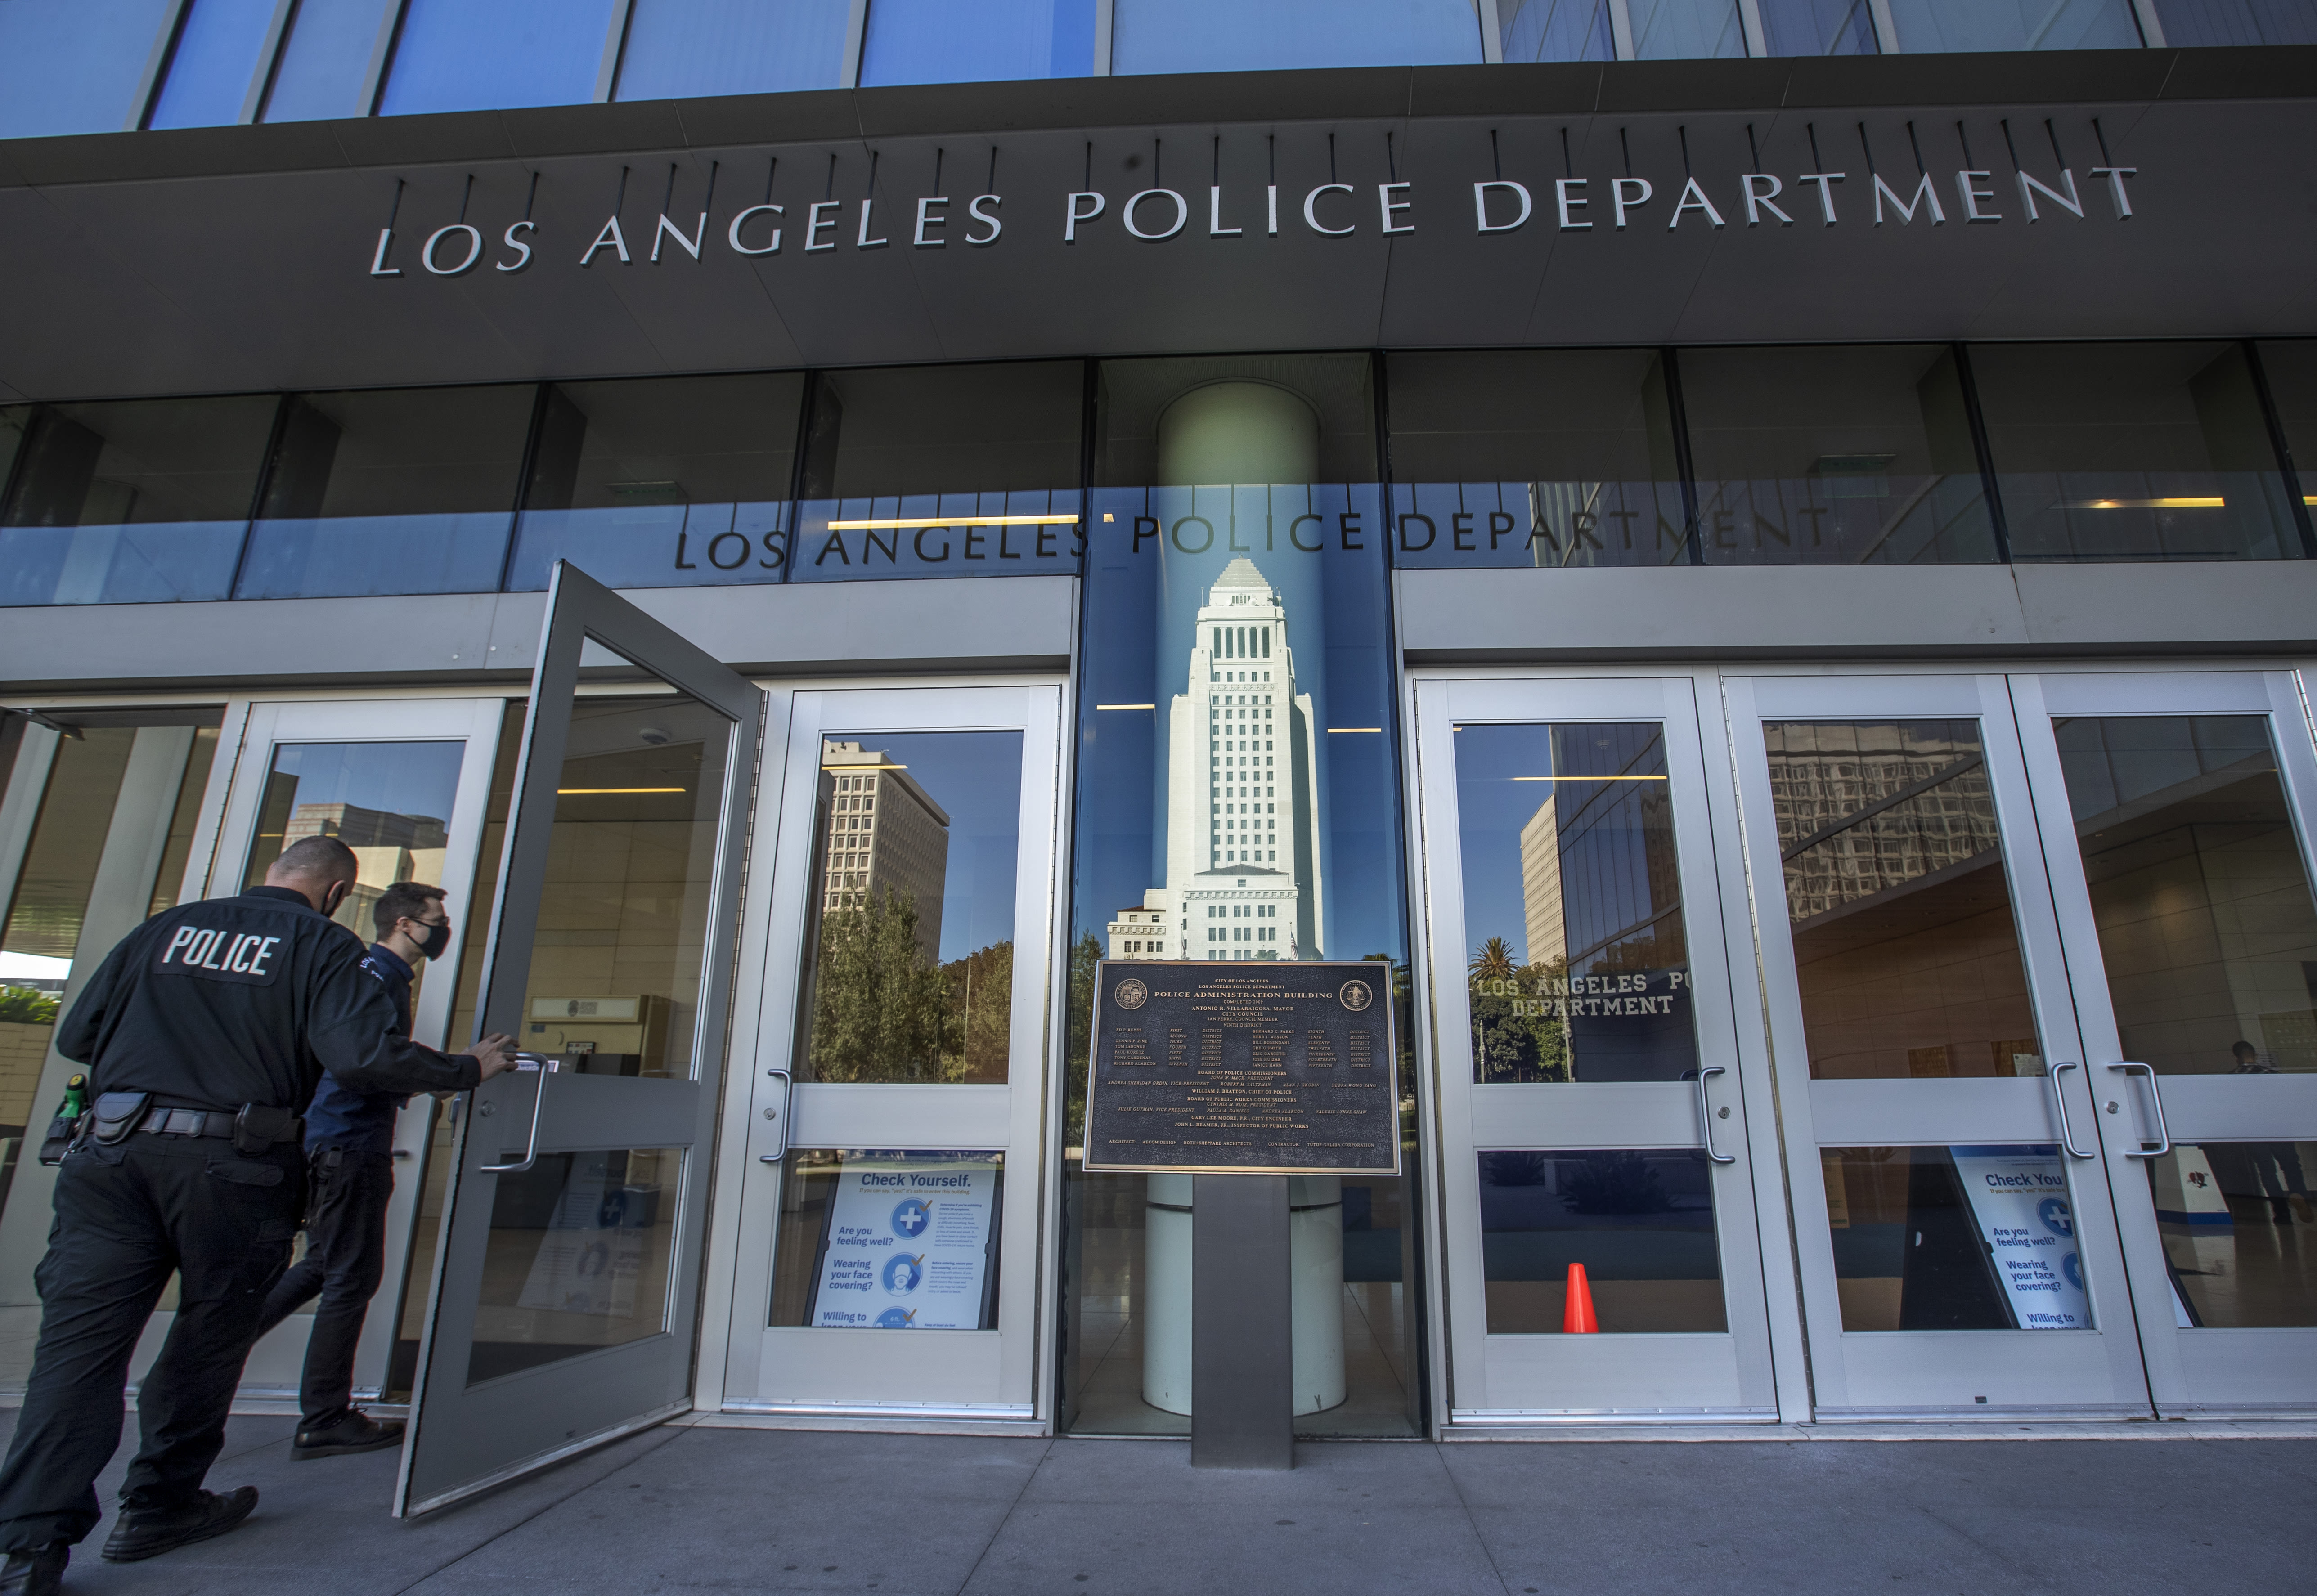 Investigation underway after video shows LAPD officer punch handcuffed man